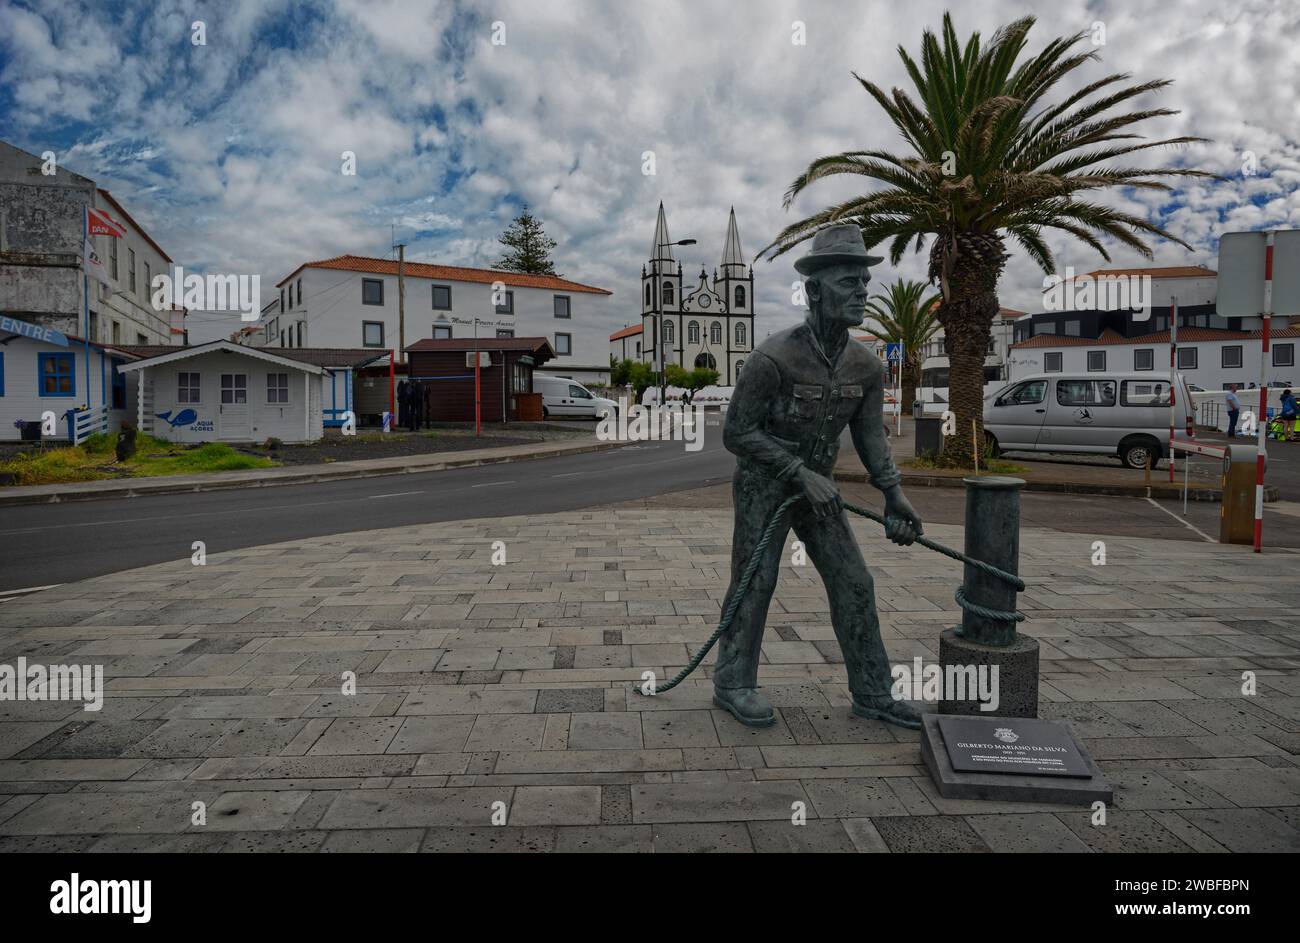 Statue by Gilberto Mariano da Silva of a sailor with rope at the old harbour of the island's capital Madalena, Madalena, Pico, Azores, Portugal Stock Photo